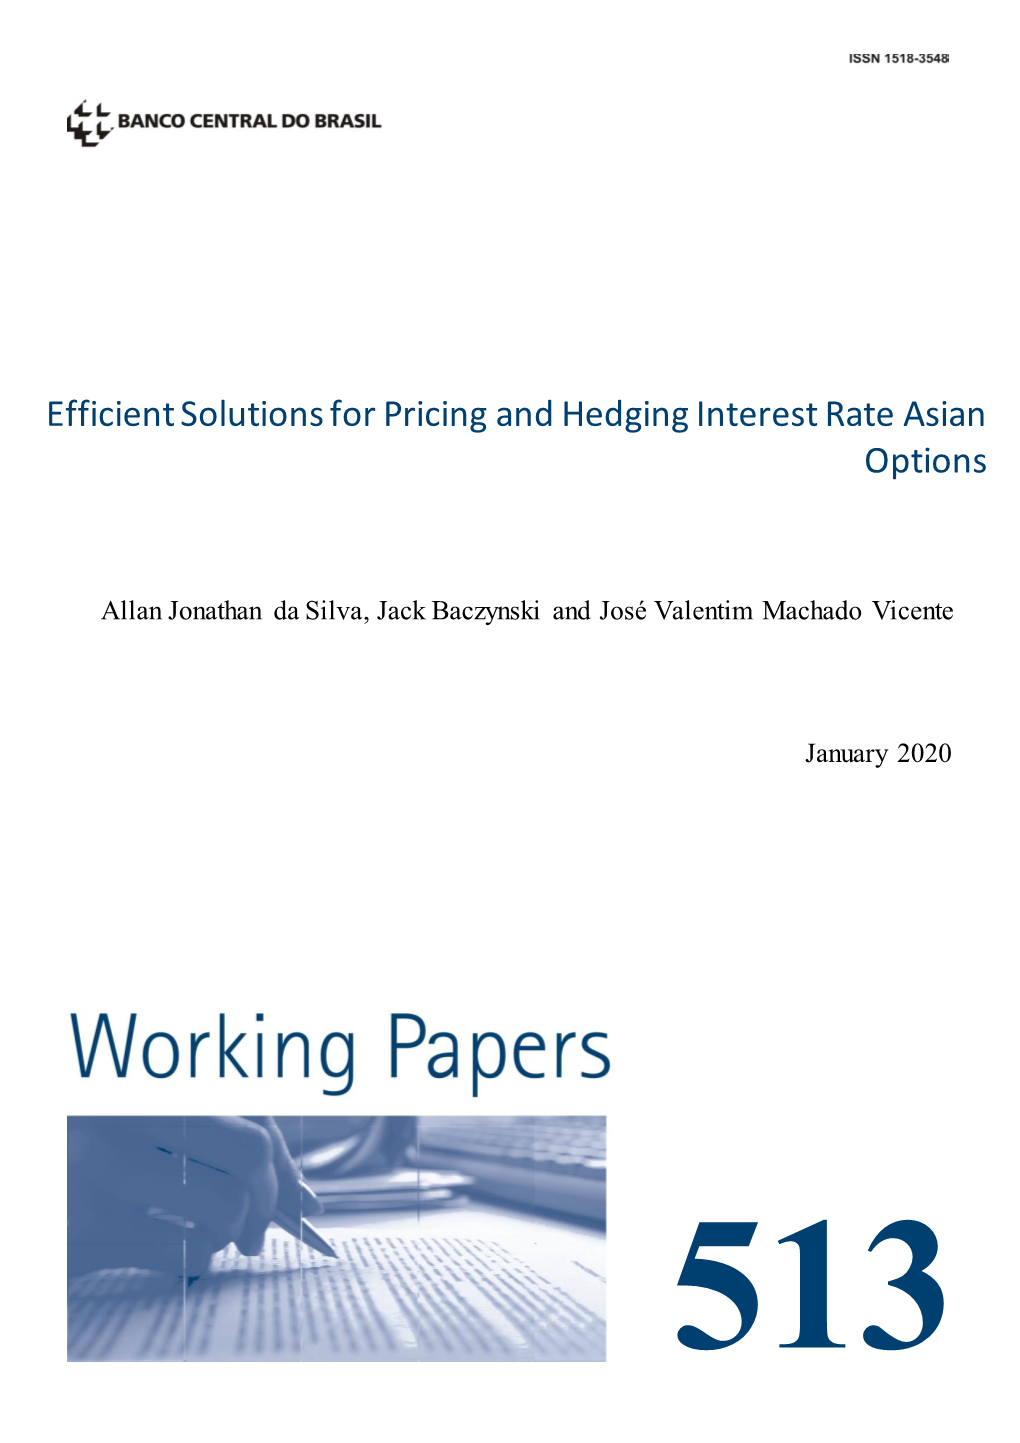 Efficient Solutions for Pricing and Hedging Interest Rate Asian Options